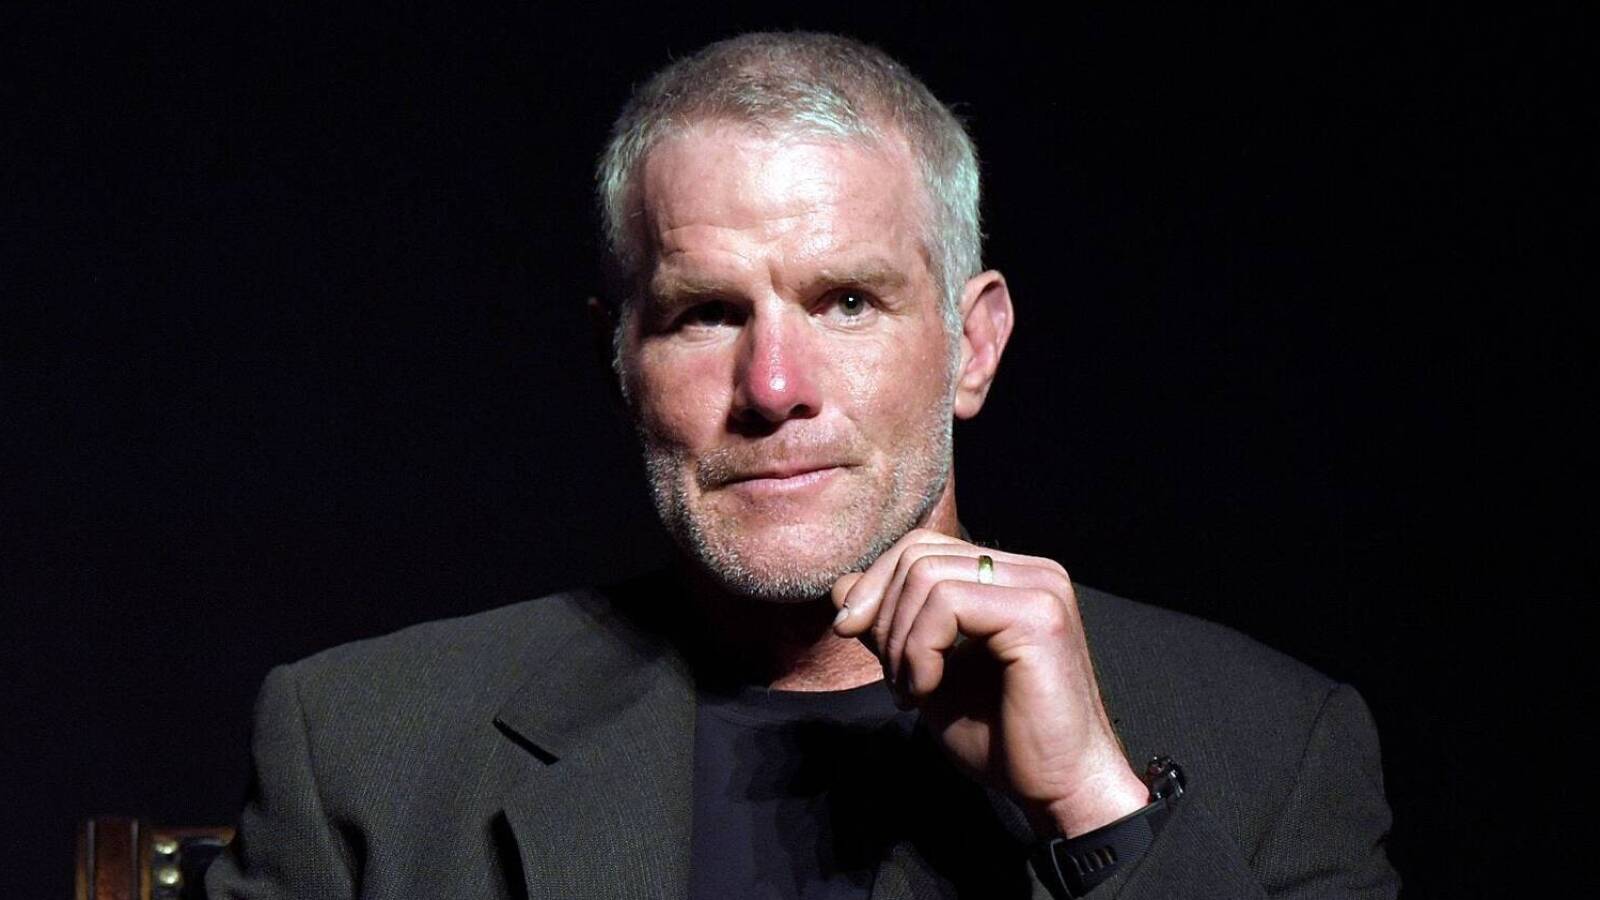 Brett Favre on welfare scandal: ‘I have done nothing wrong’